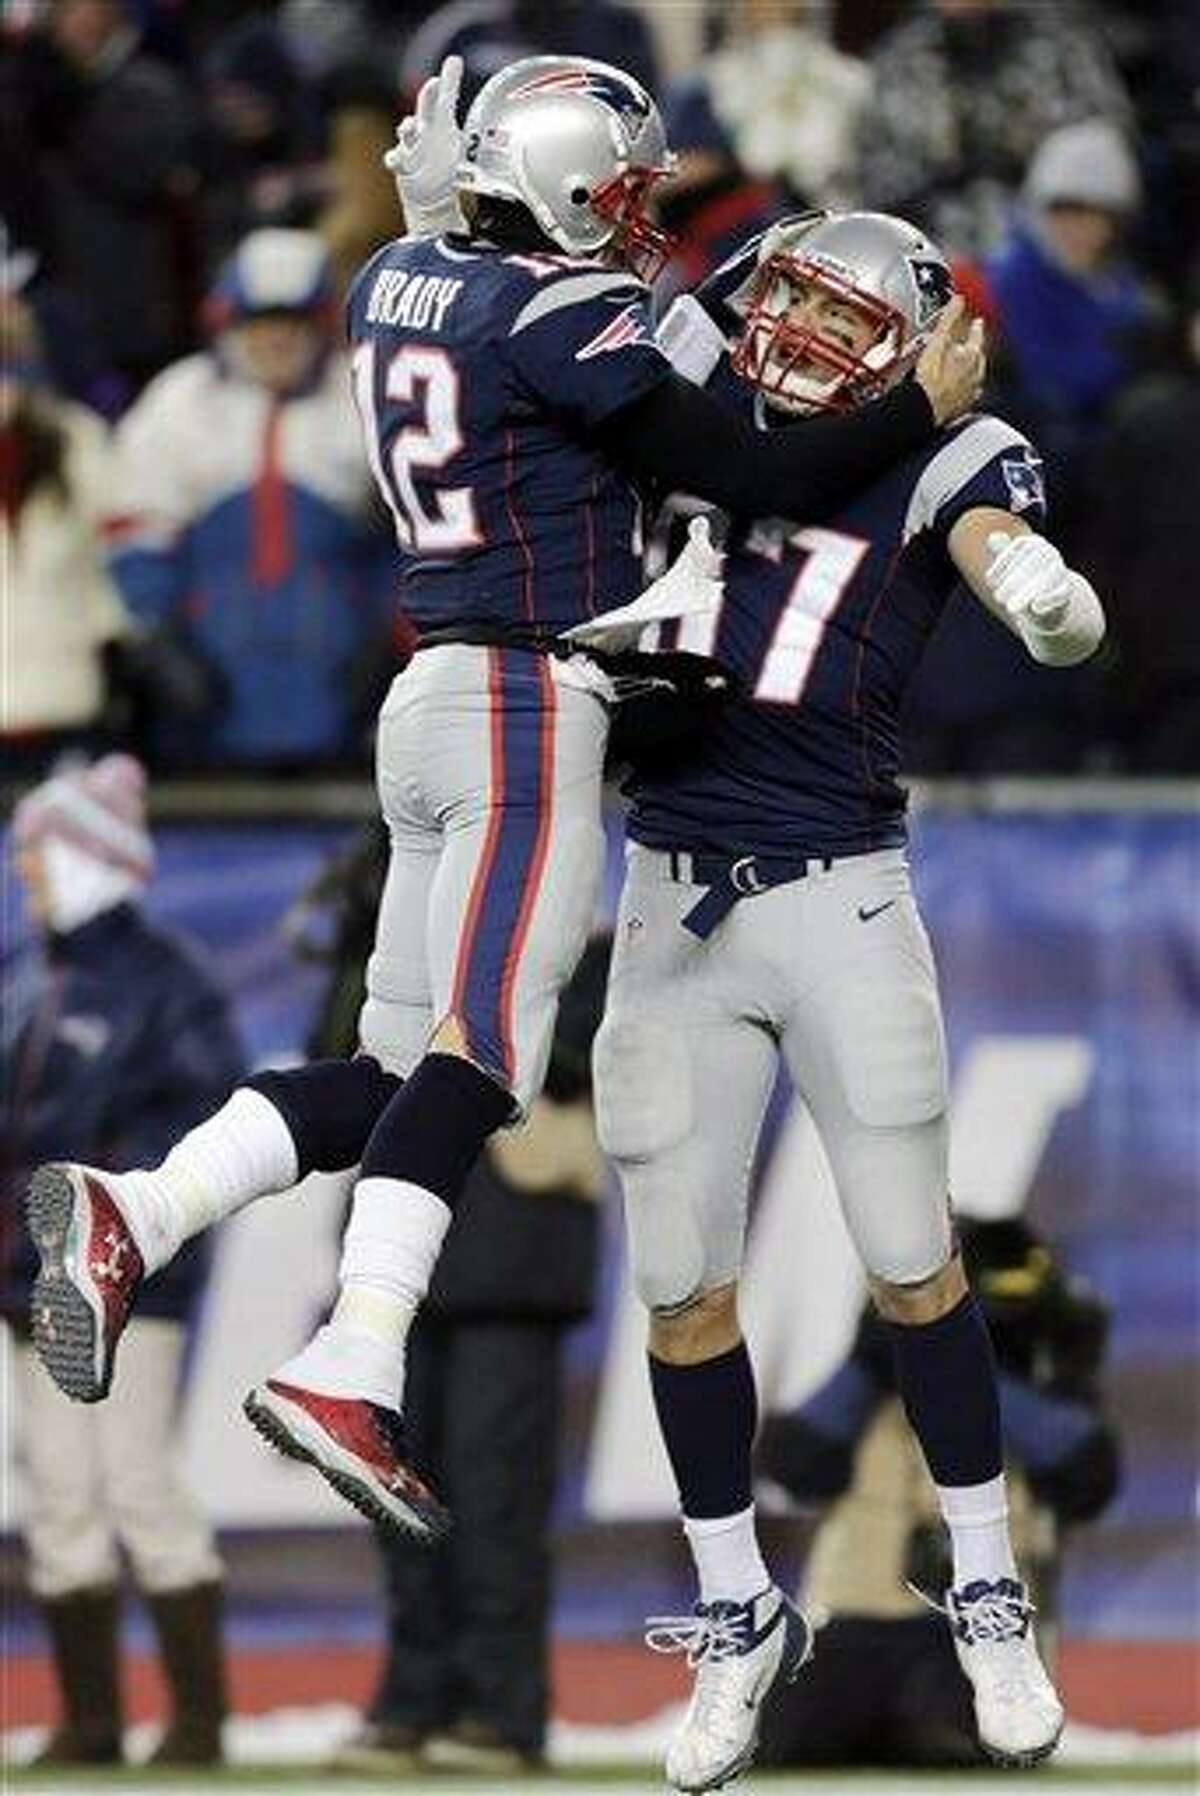 New England Patriots quarterback Tom Brady (12) celebrates his touchdown pass to tight end Rob Gronkowski (87) during the fourth quarter of an NFL football game in Foxborough, Mass., Sunday, Dec. 30, 2012. Gronkowski was active after missing five games with a broken left forearm. (AP Photo/Charles Krupa)